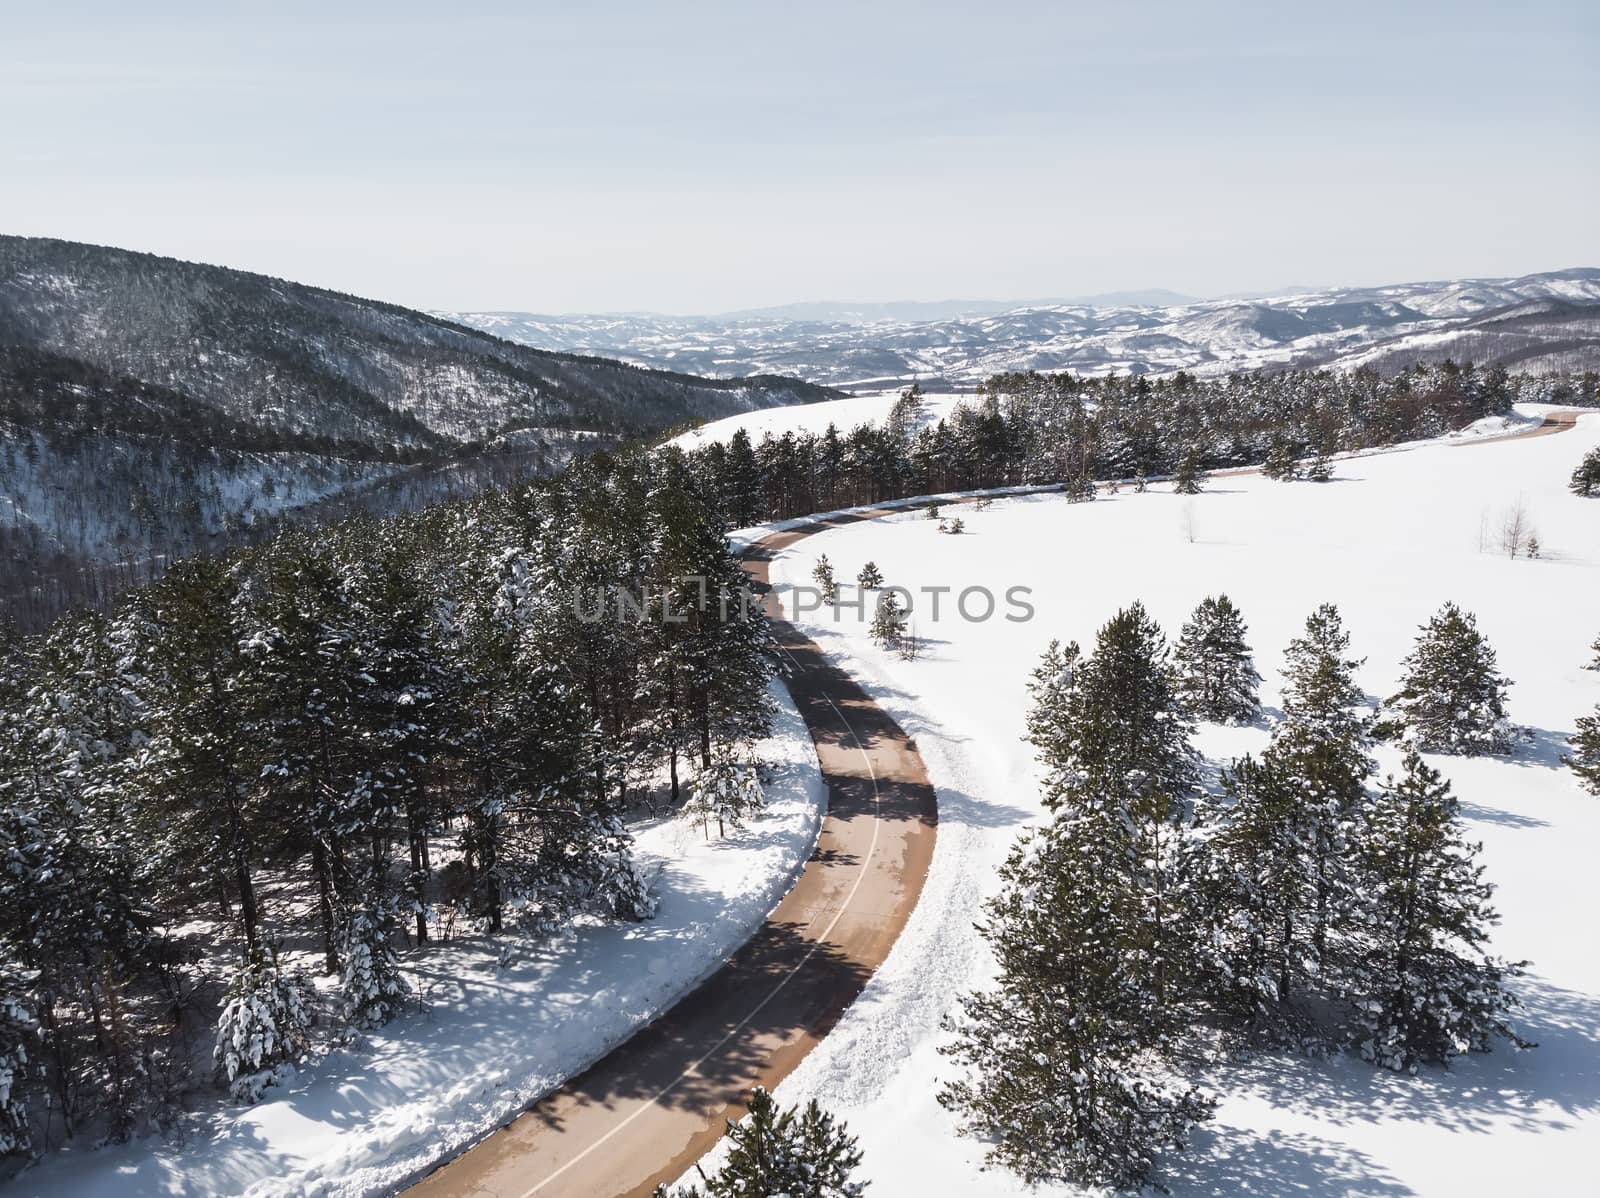 Winter landscape in sunlight. View on the mountain road surrounded by evergreen trees in winter, drone shot